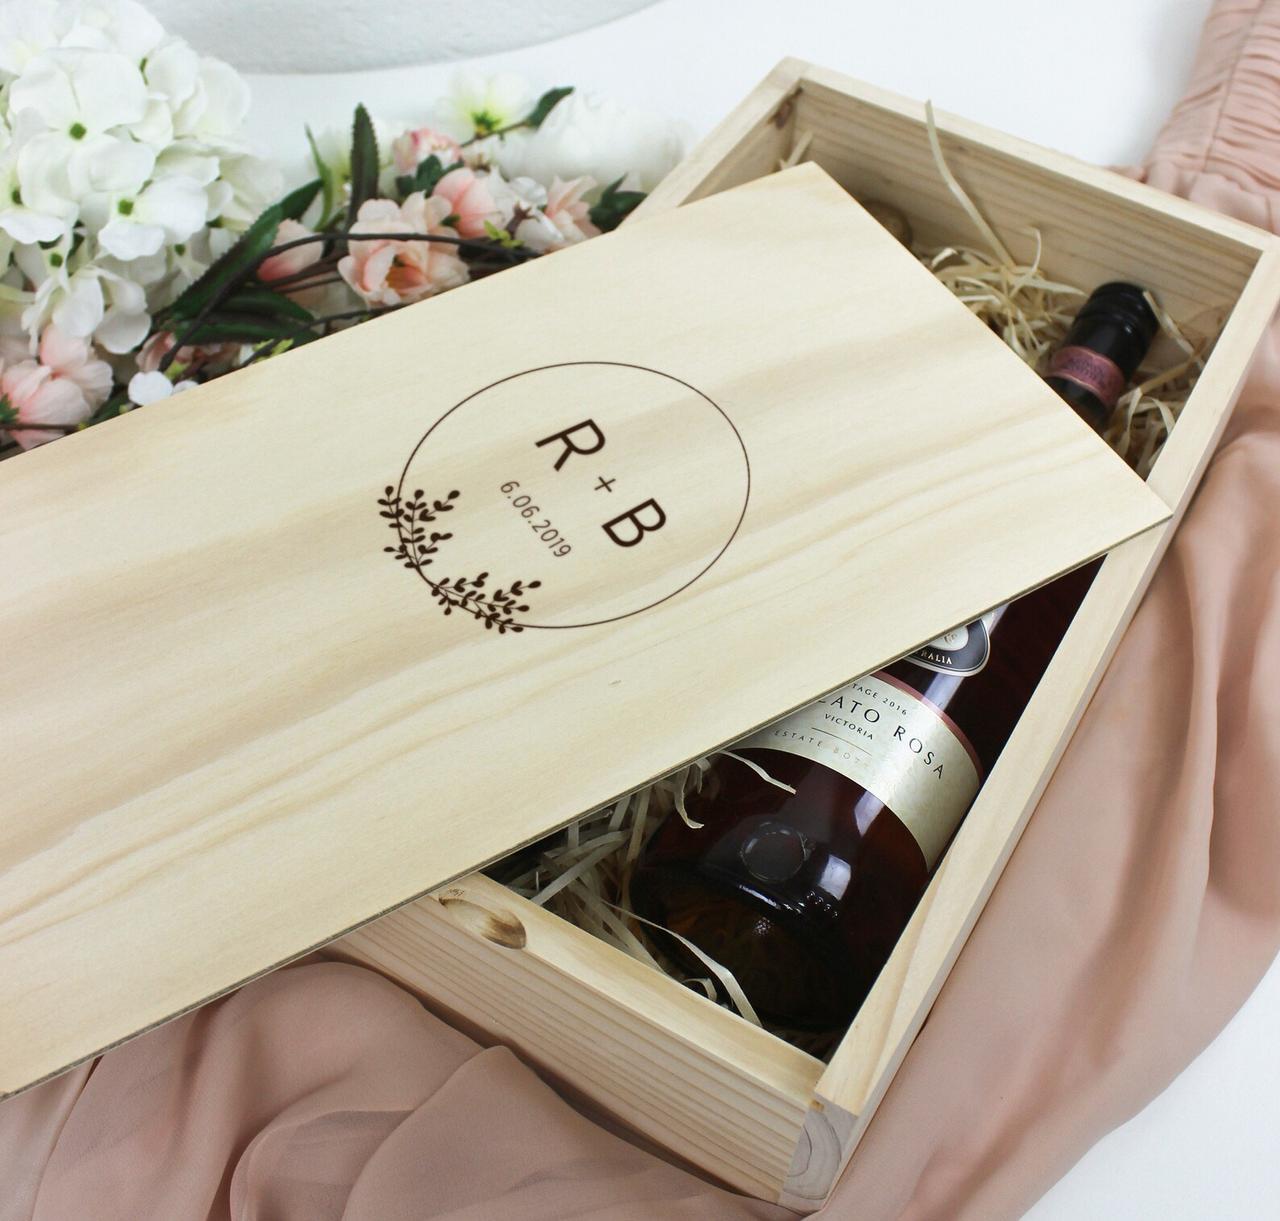 Best Wedding Gift Ideas  25 Kitchen Gifts for Couples - Mod Daily